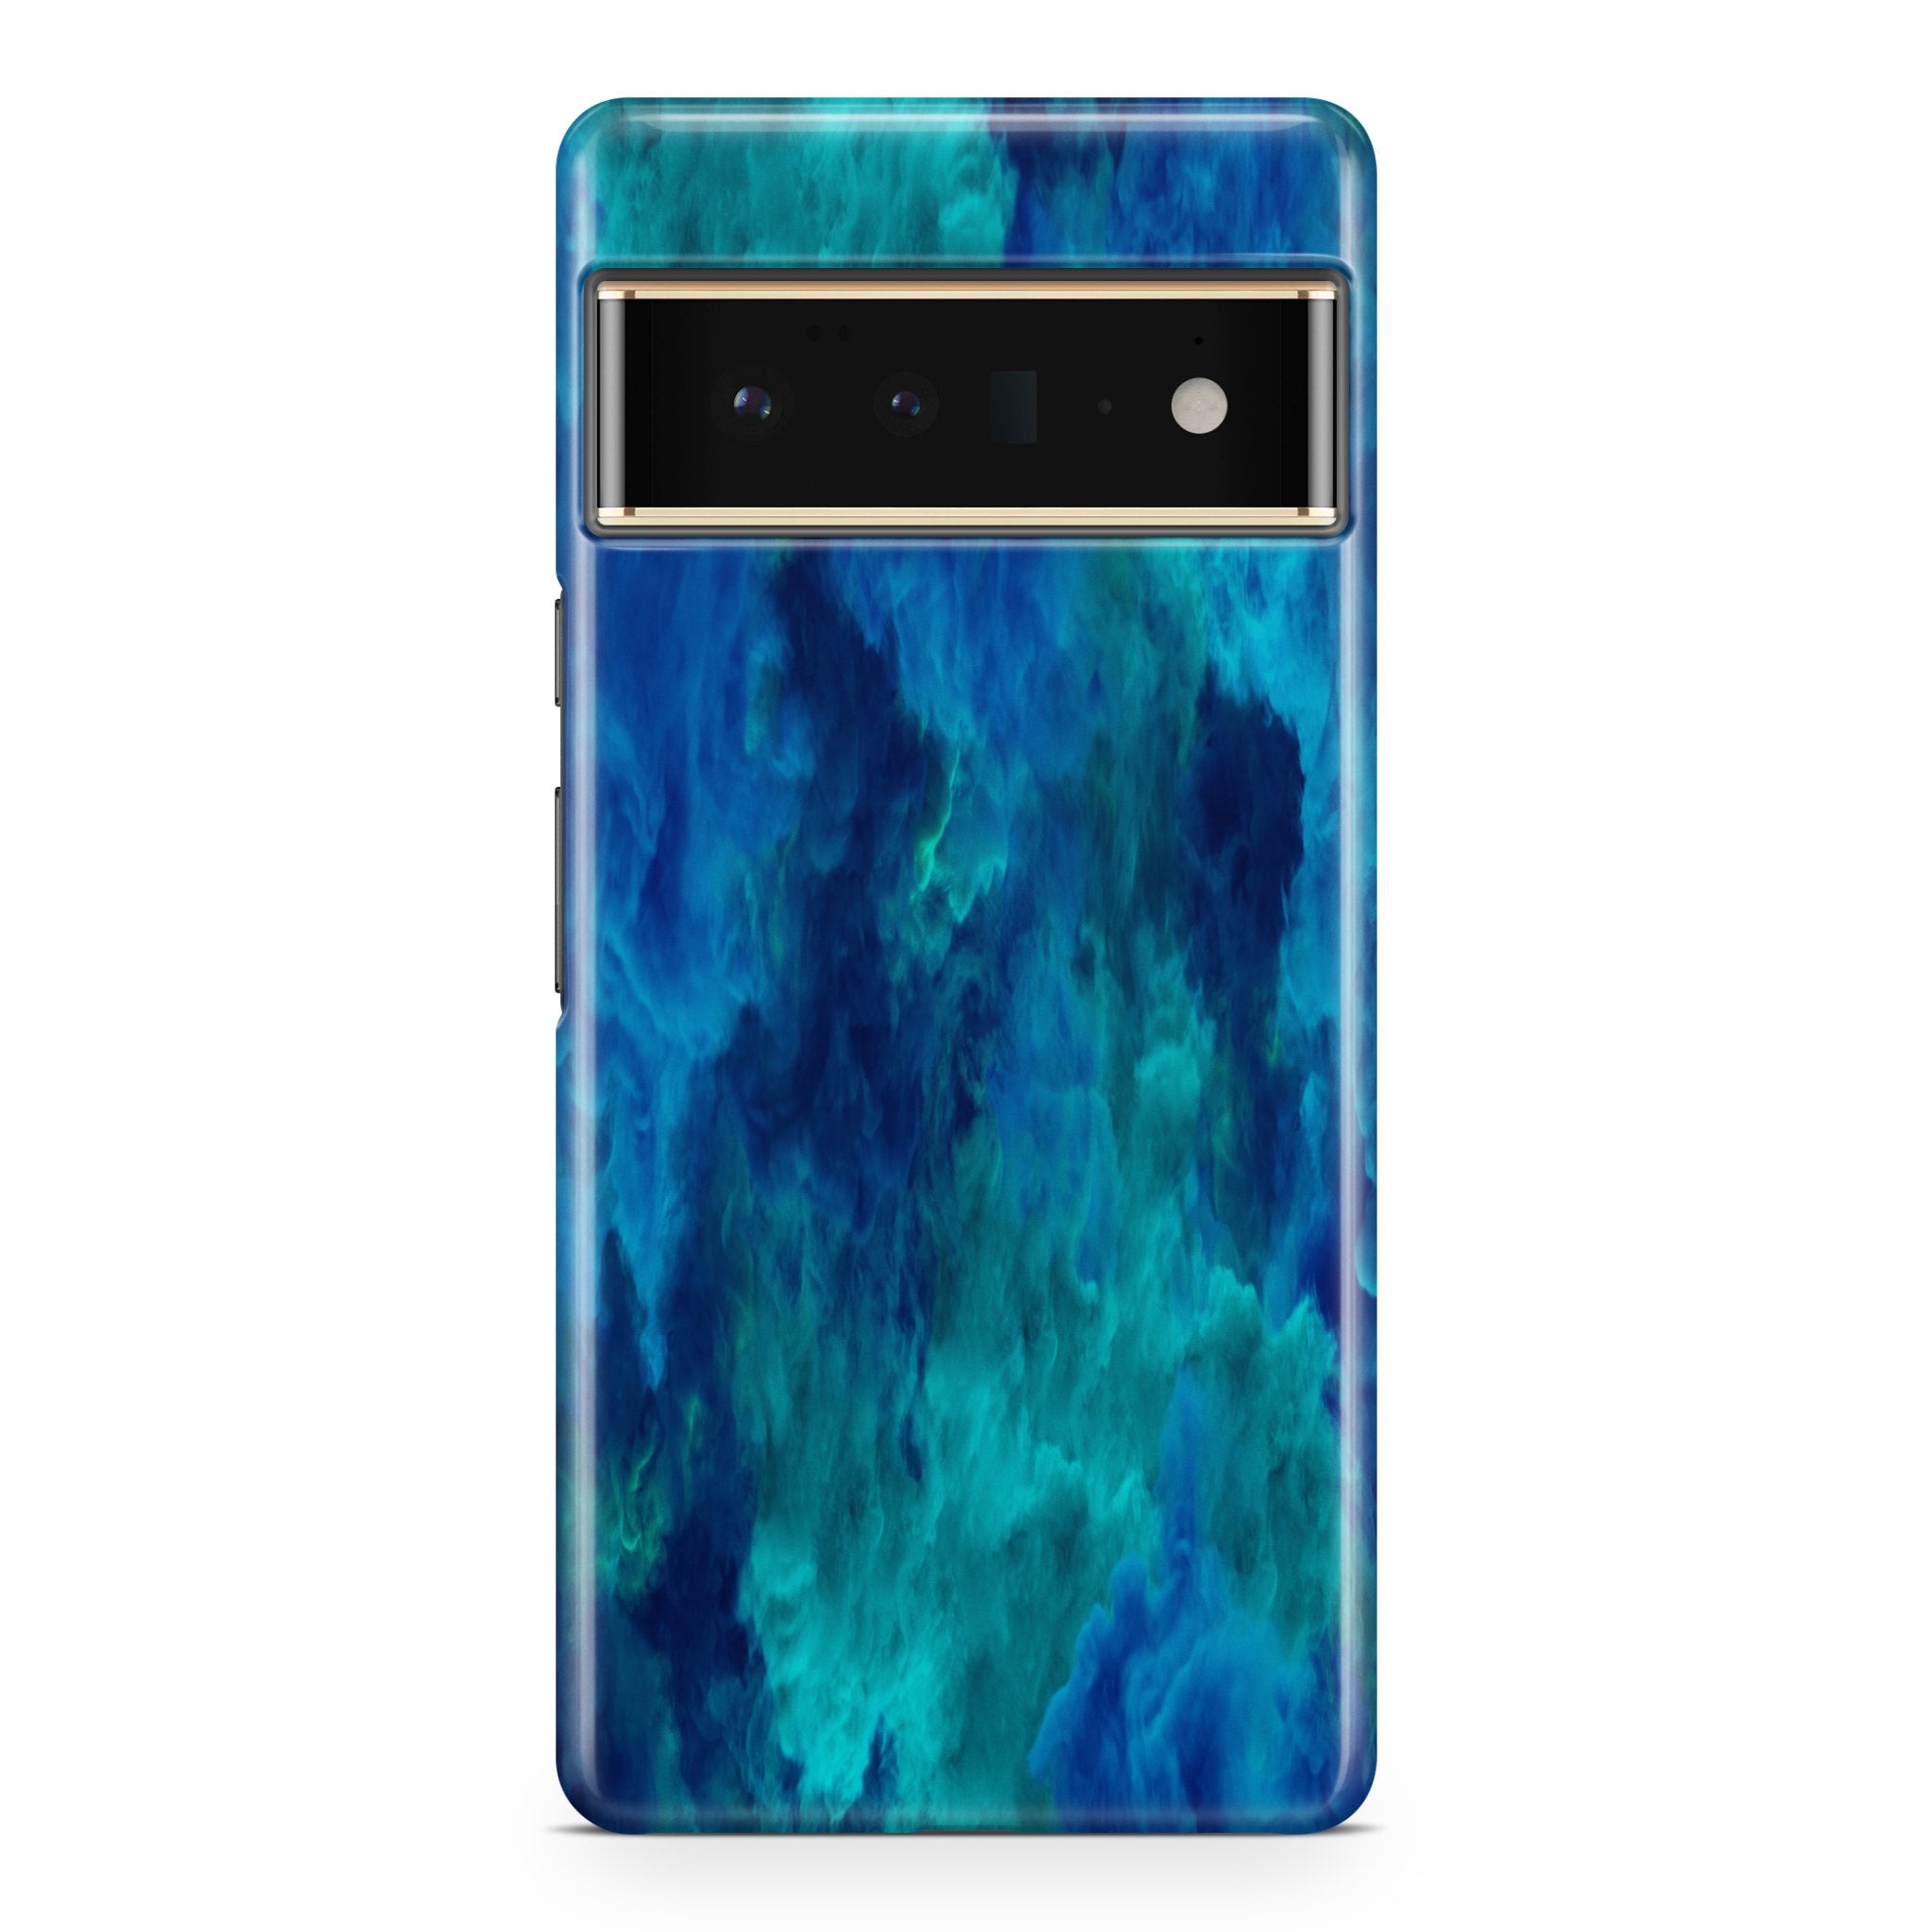 Blue Smoke Cloud - Google phone case designs by CaseSwagger